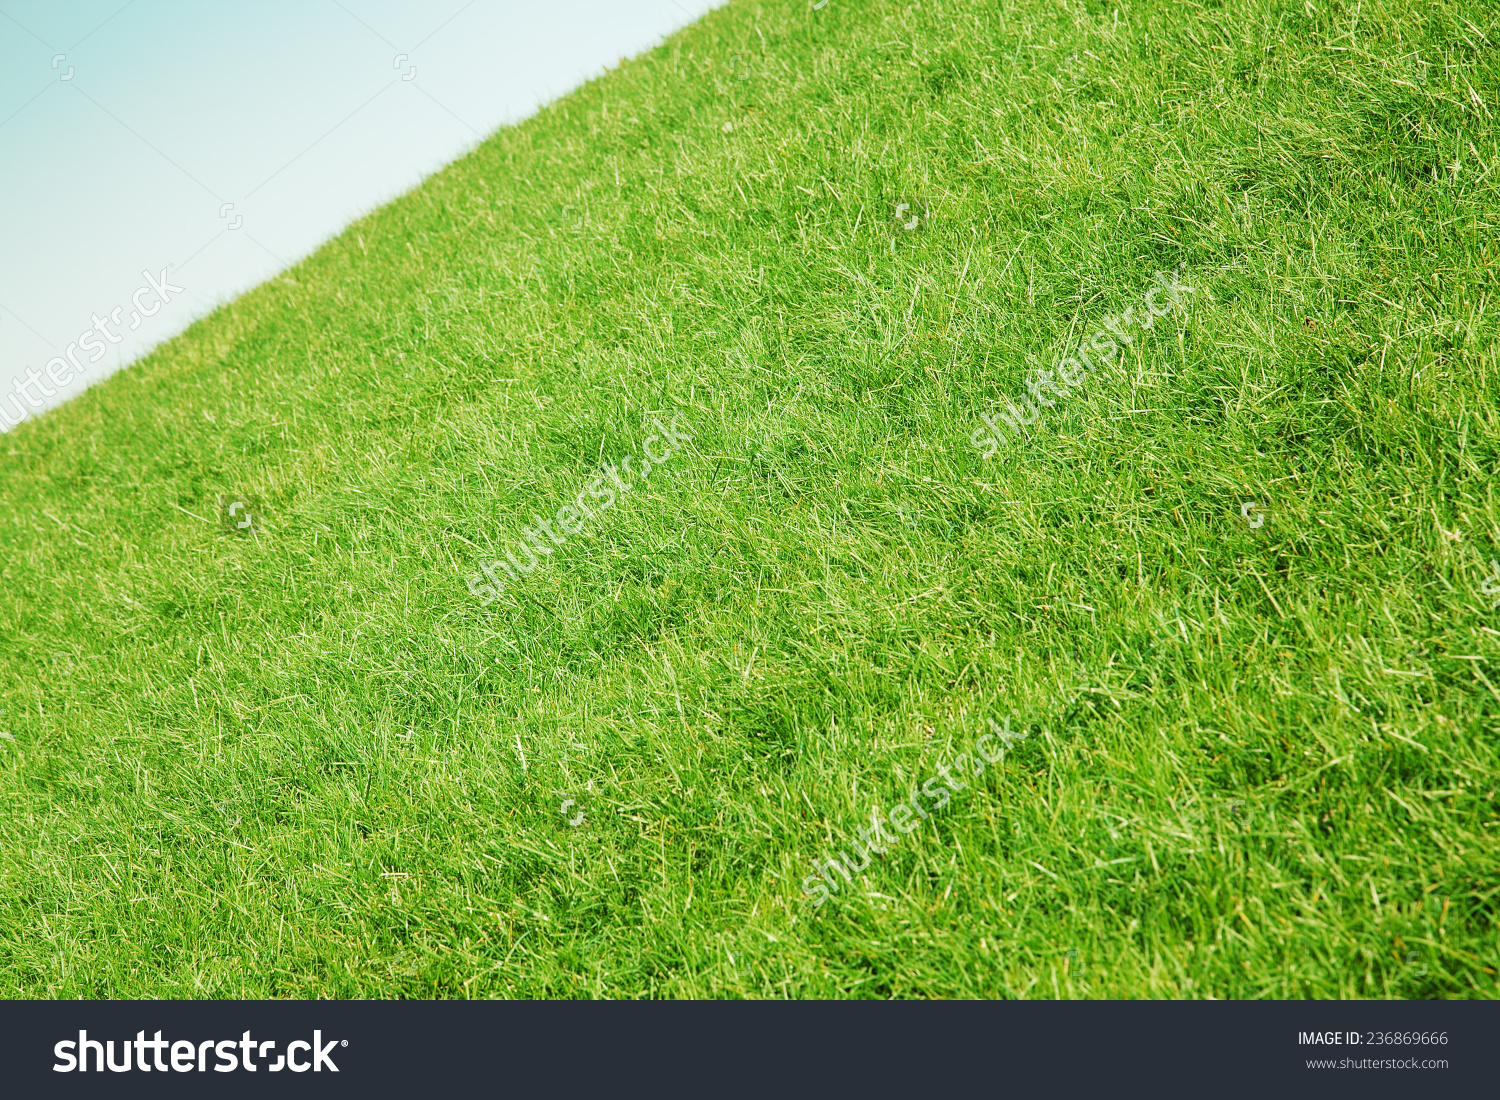 Inclined Slope Green Grass Blue Sky Stock Photo 236869666.